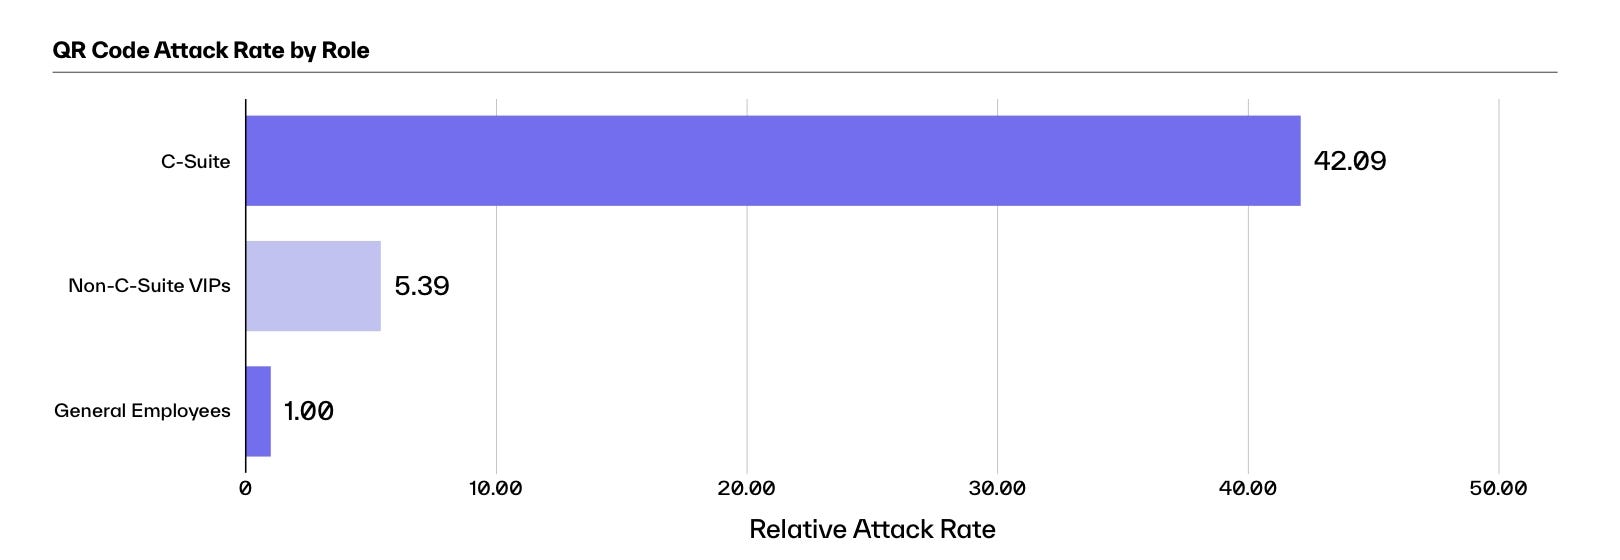 bar chart of qr attacks by role